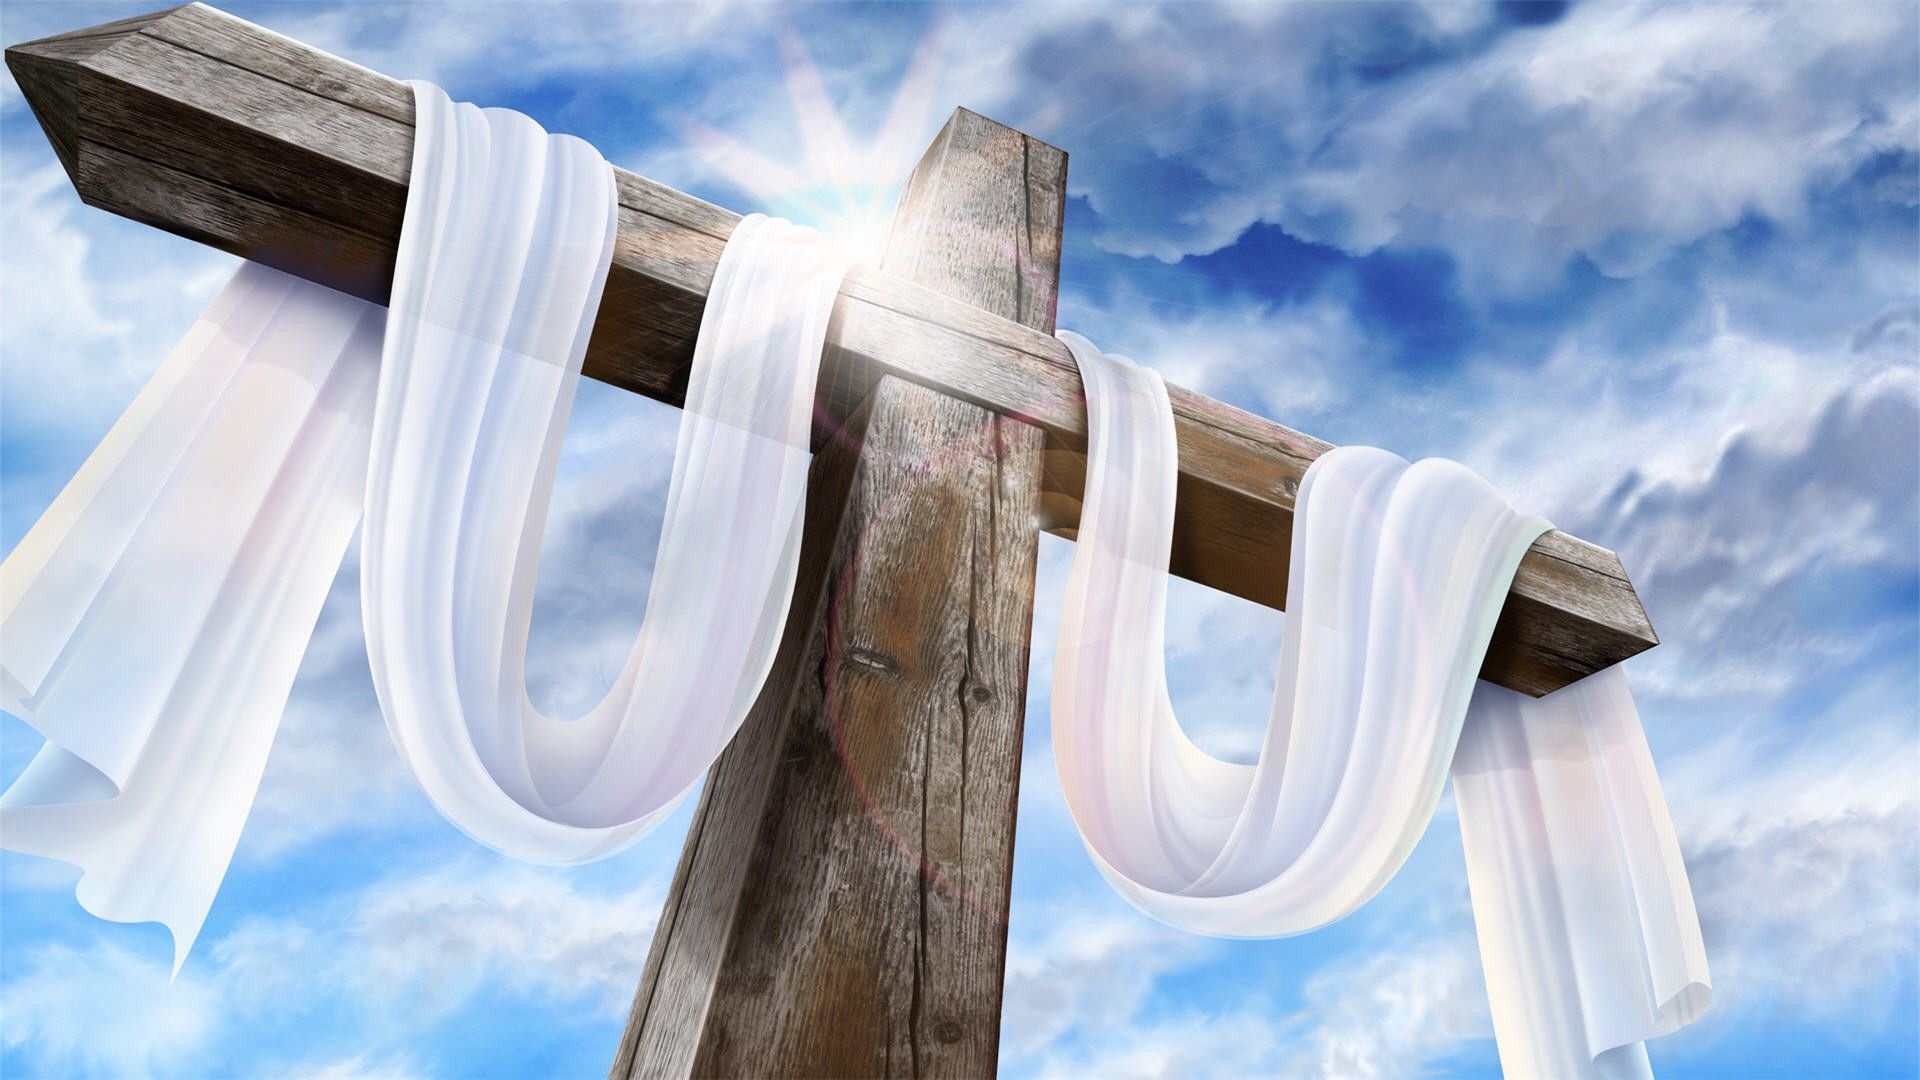 Jesus, Easter, Wallpaper, Widescreen, High, Definition, Free, Image, Cool, Abstract, Wonderful, 1920x1080